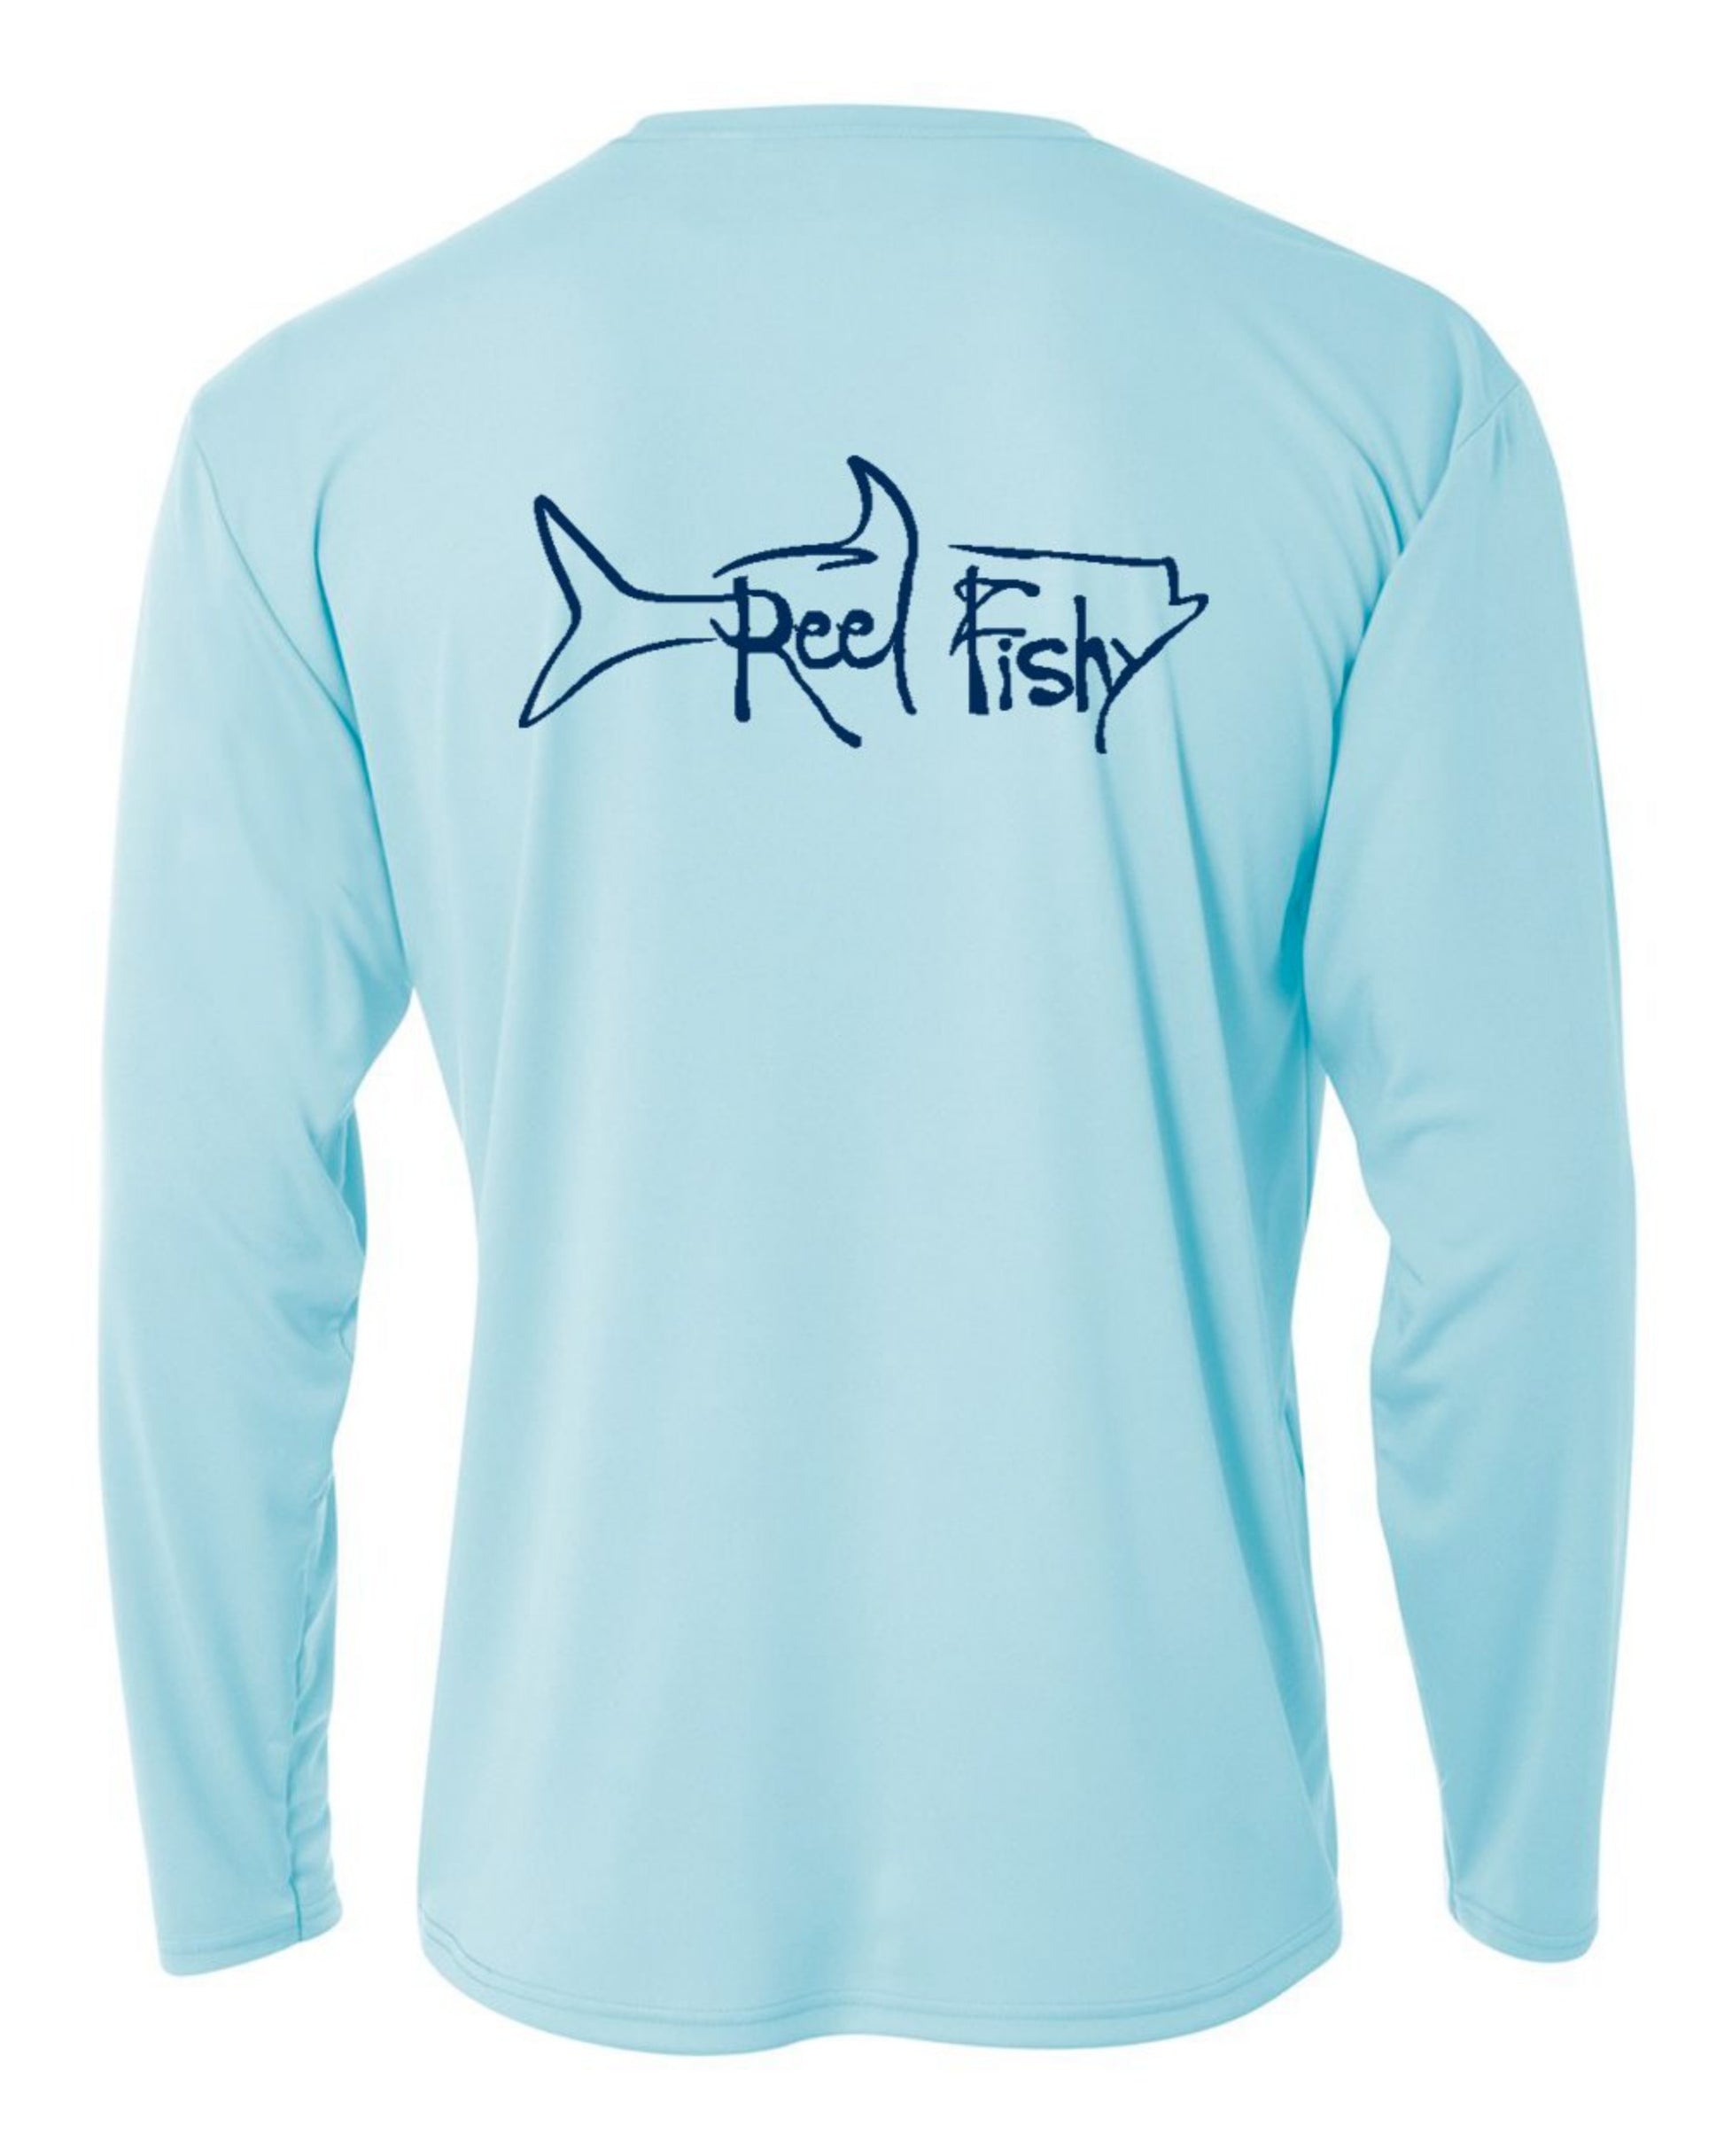 Youth Performance Dry-Fit Tarpon Fishing Shirts with Sun Protection by Reel Fishy Apparel - Long Sleeve Pastel Blue